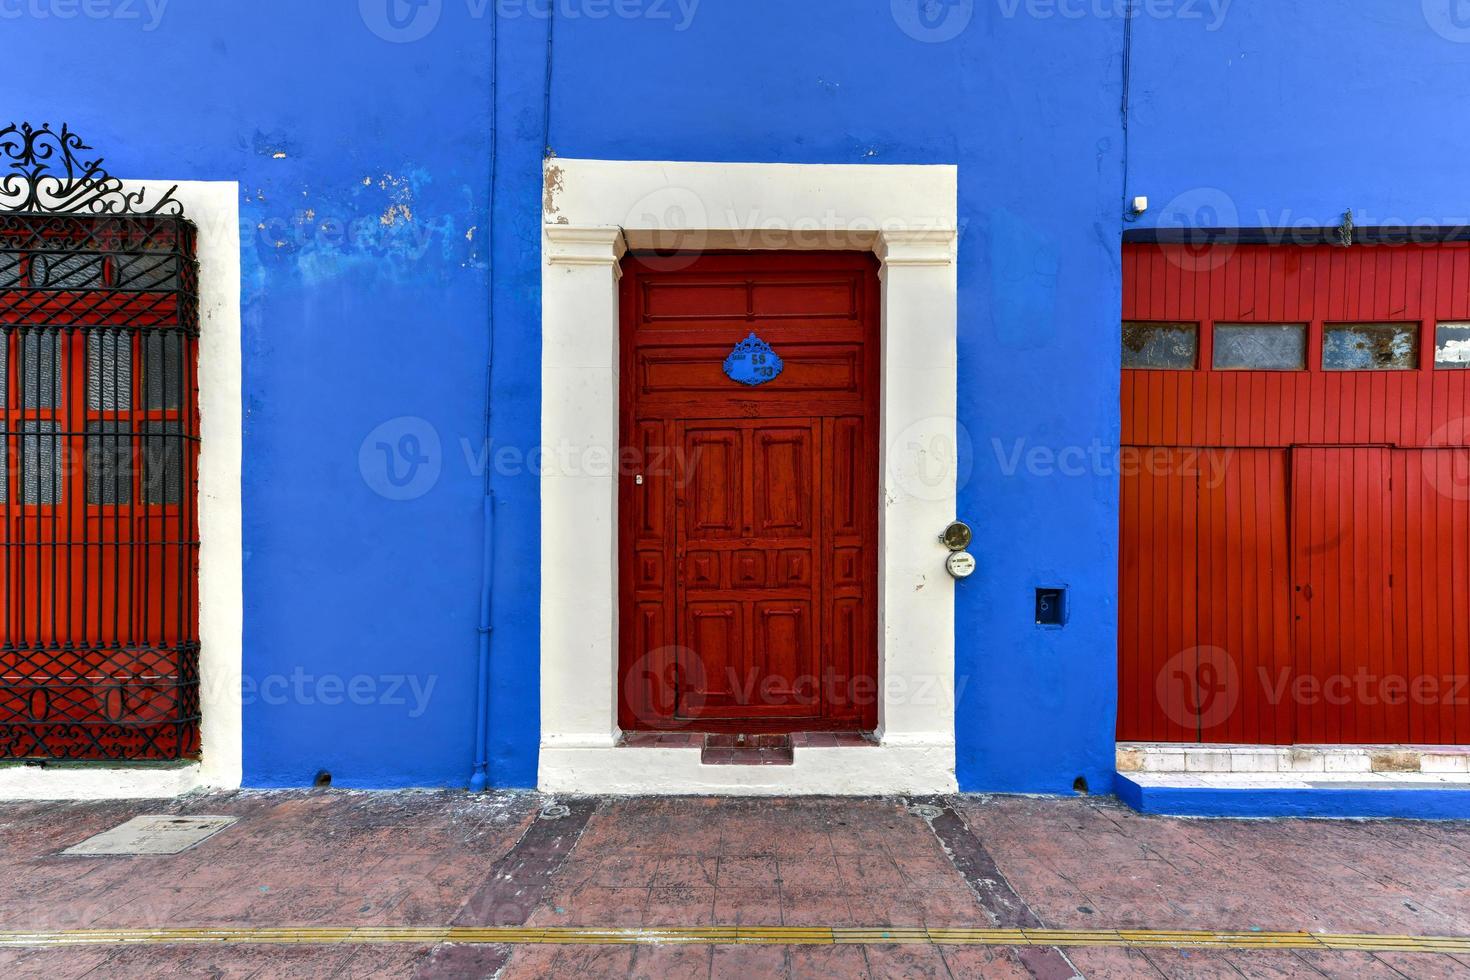 Bright colors in colonial houses on a sunny day in Campeche, Mexico. photo